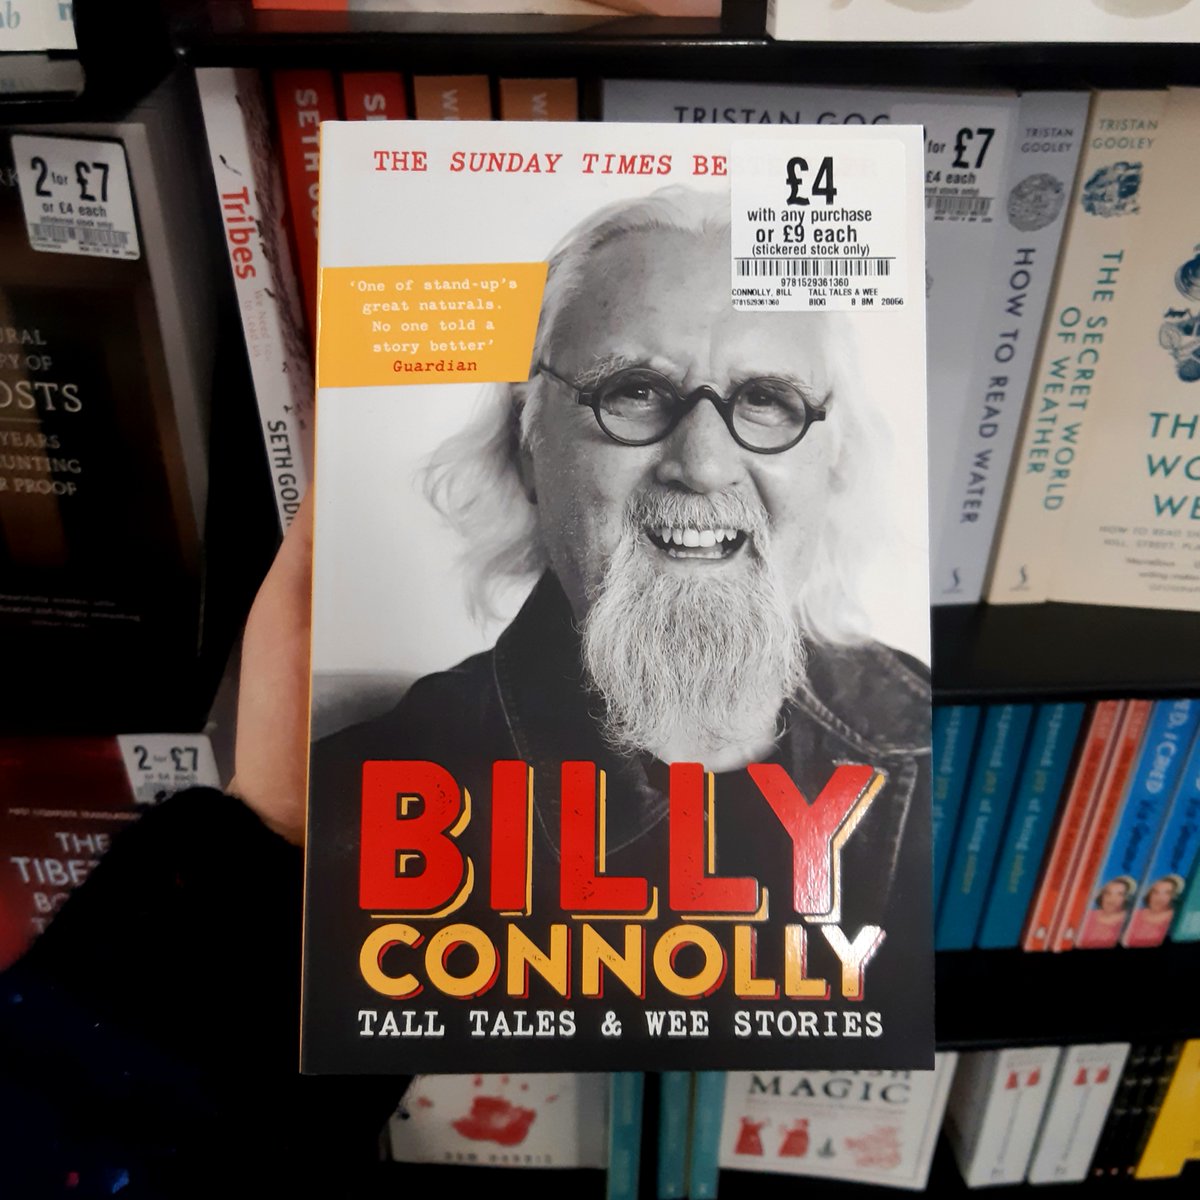 In Tall Tales and Wee Stories, Billy Connolly deftly spins yarns and anecdotes, showcasing his unparalleled wit. In stock for just £4 with any purchase! #gettofopp